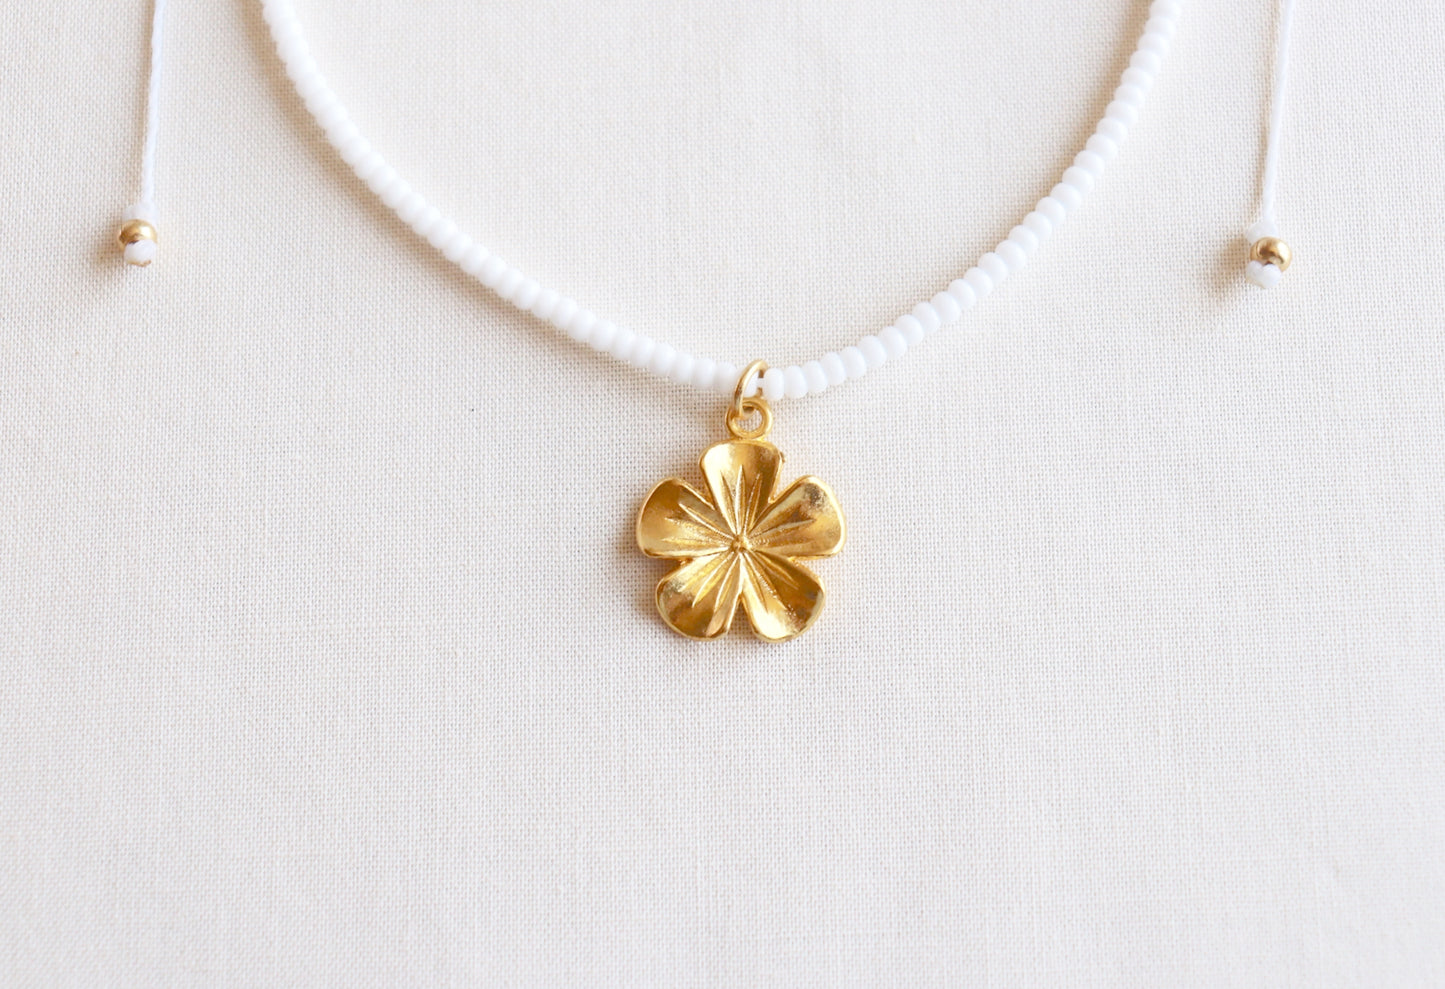 Golden Plumeria Limited Edition Waterproof Necklace